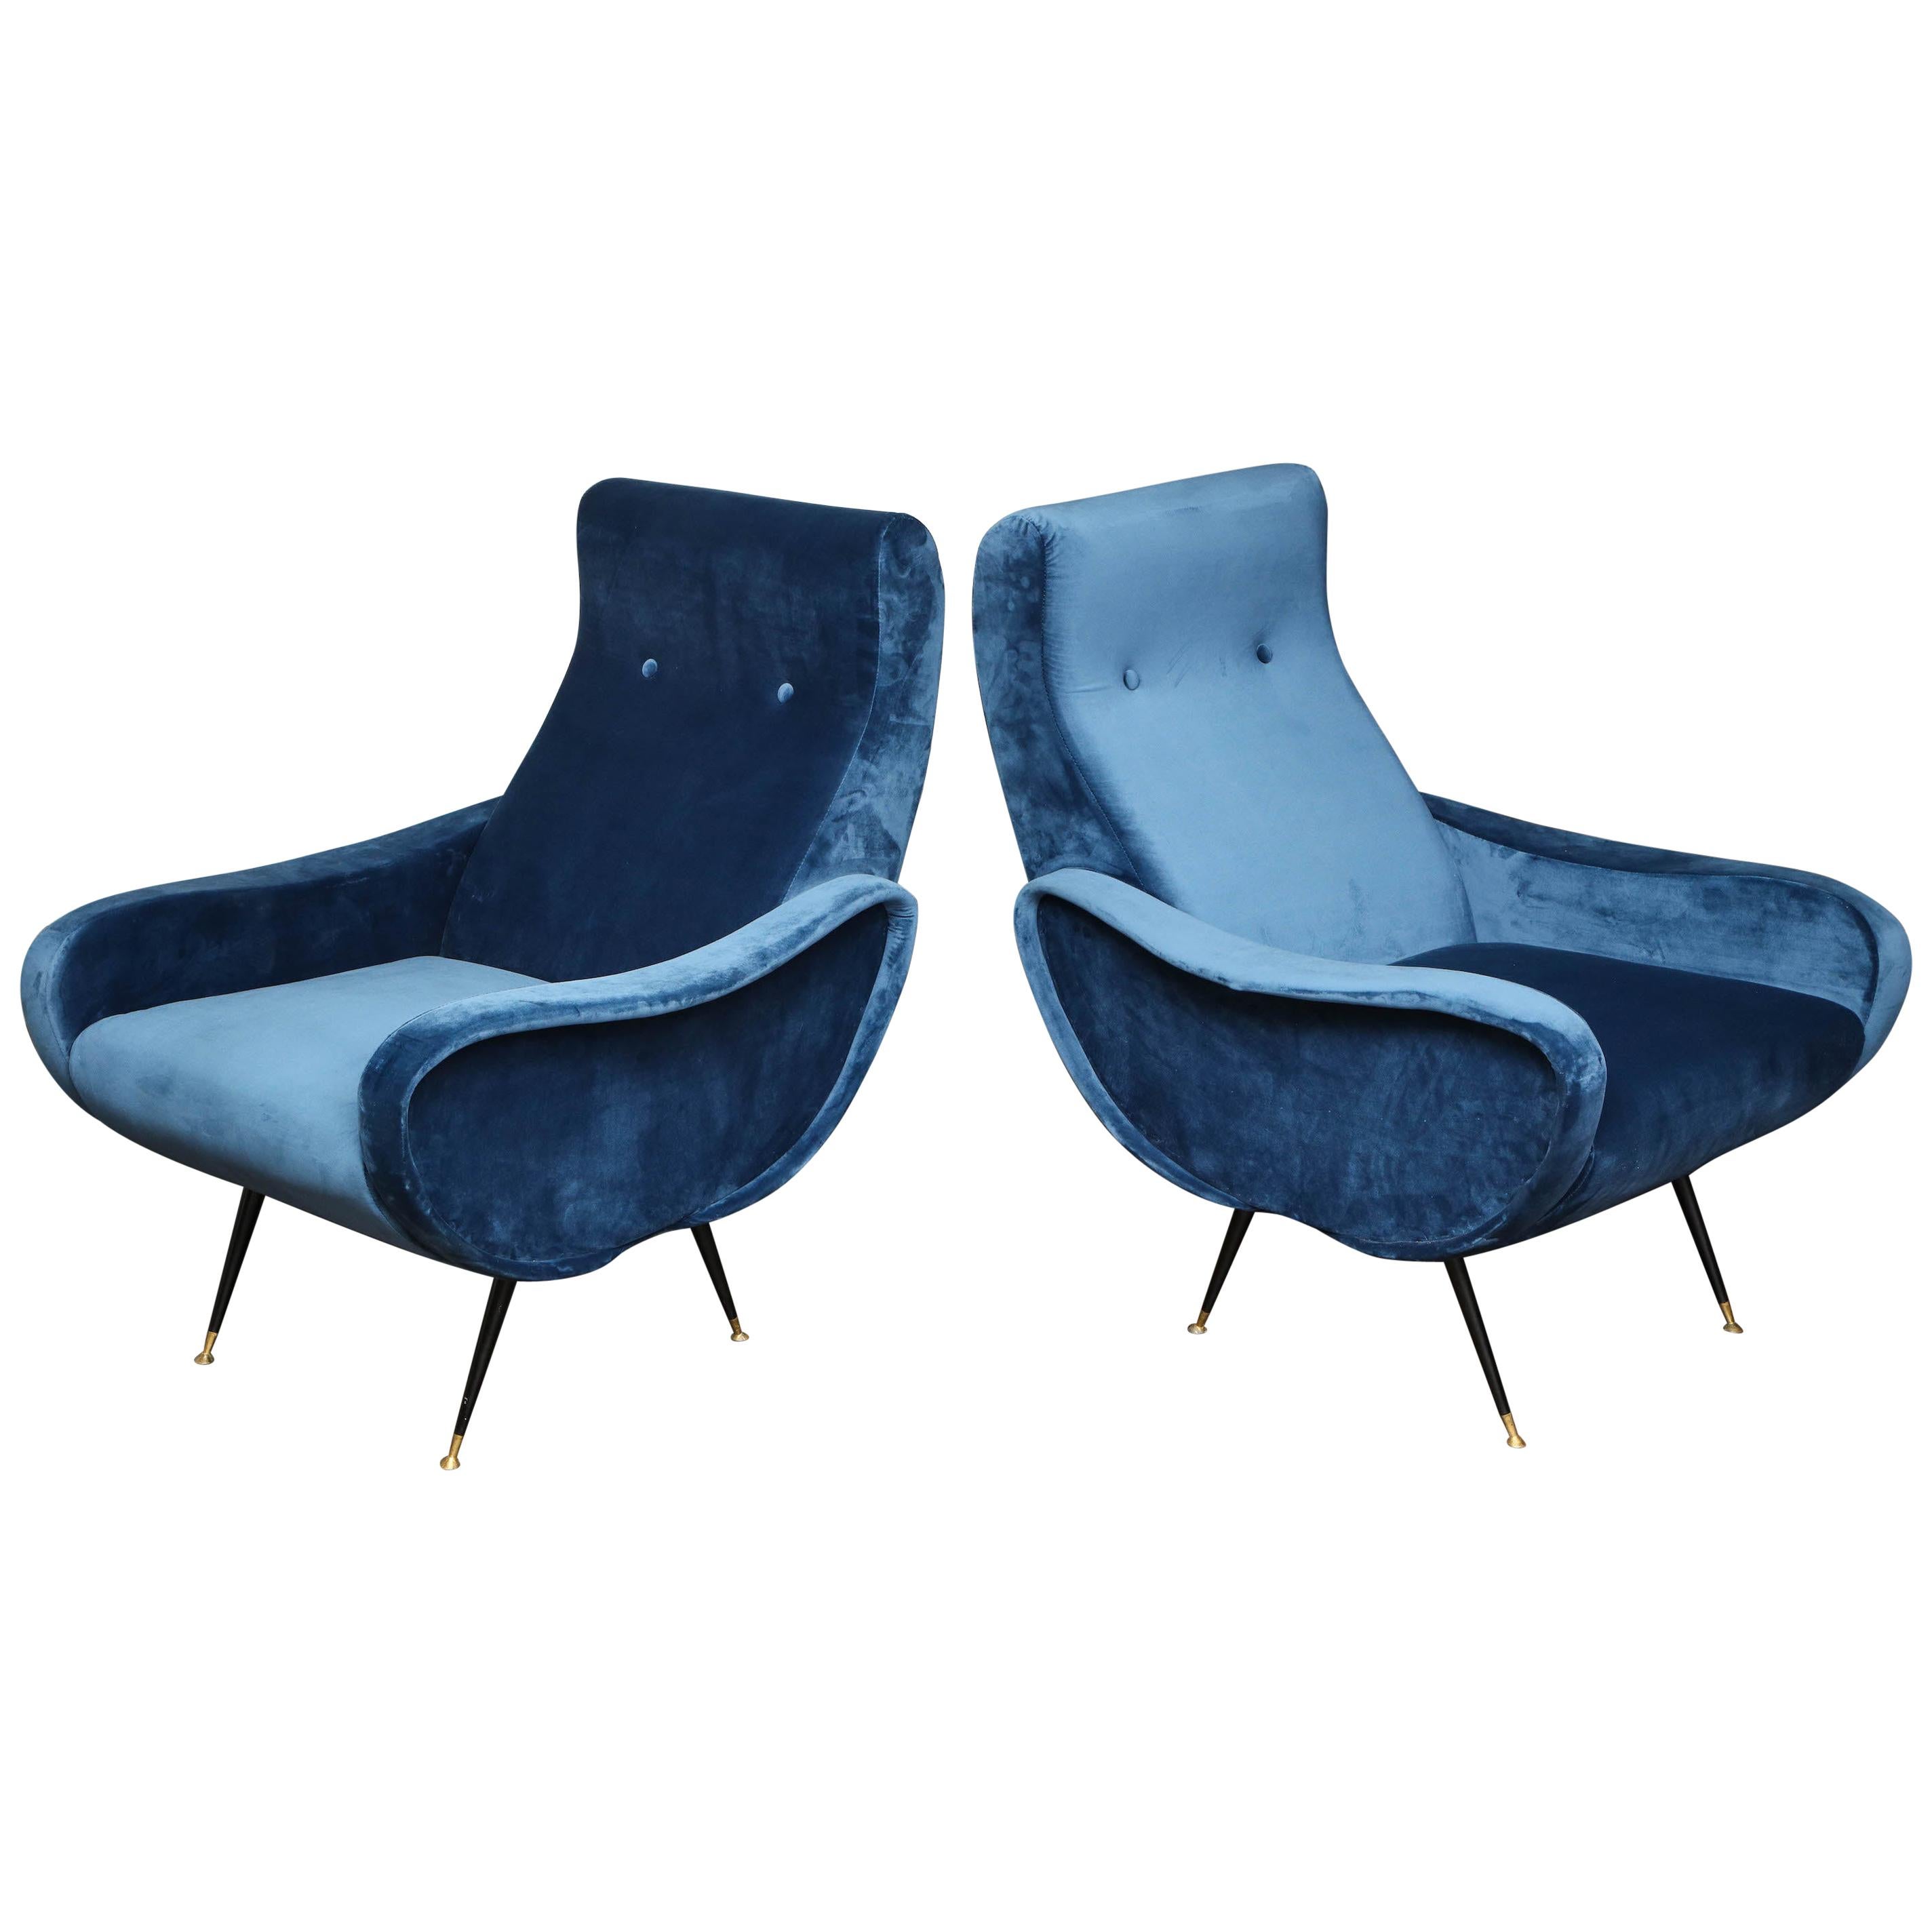 Pair of 1970's Italian Lounge Chairs in the Manner of Marco Zanuso